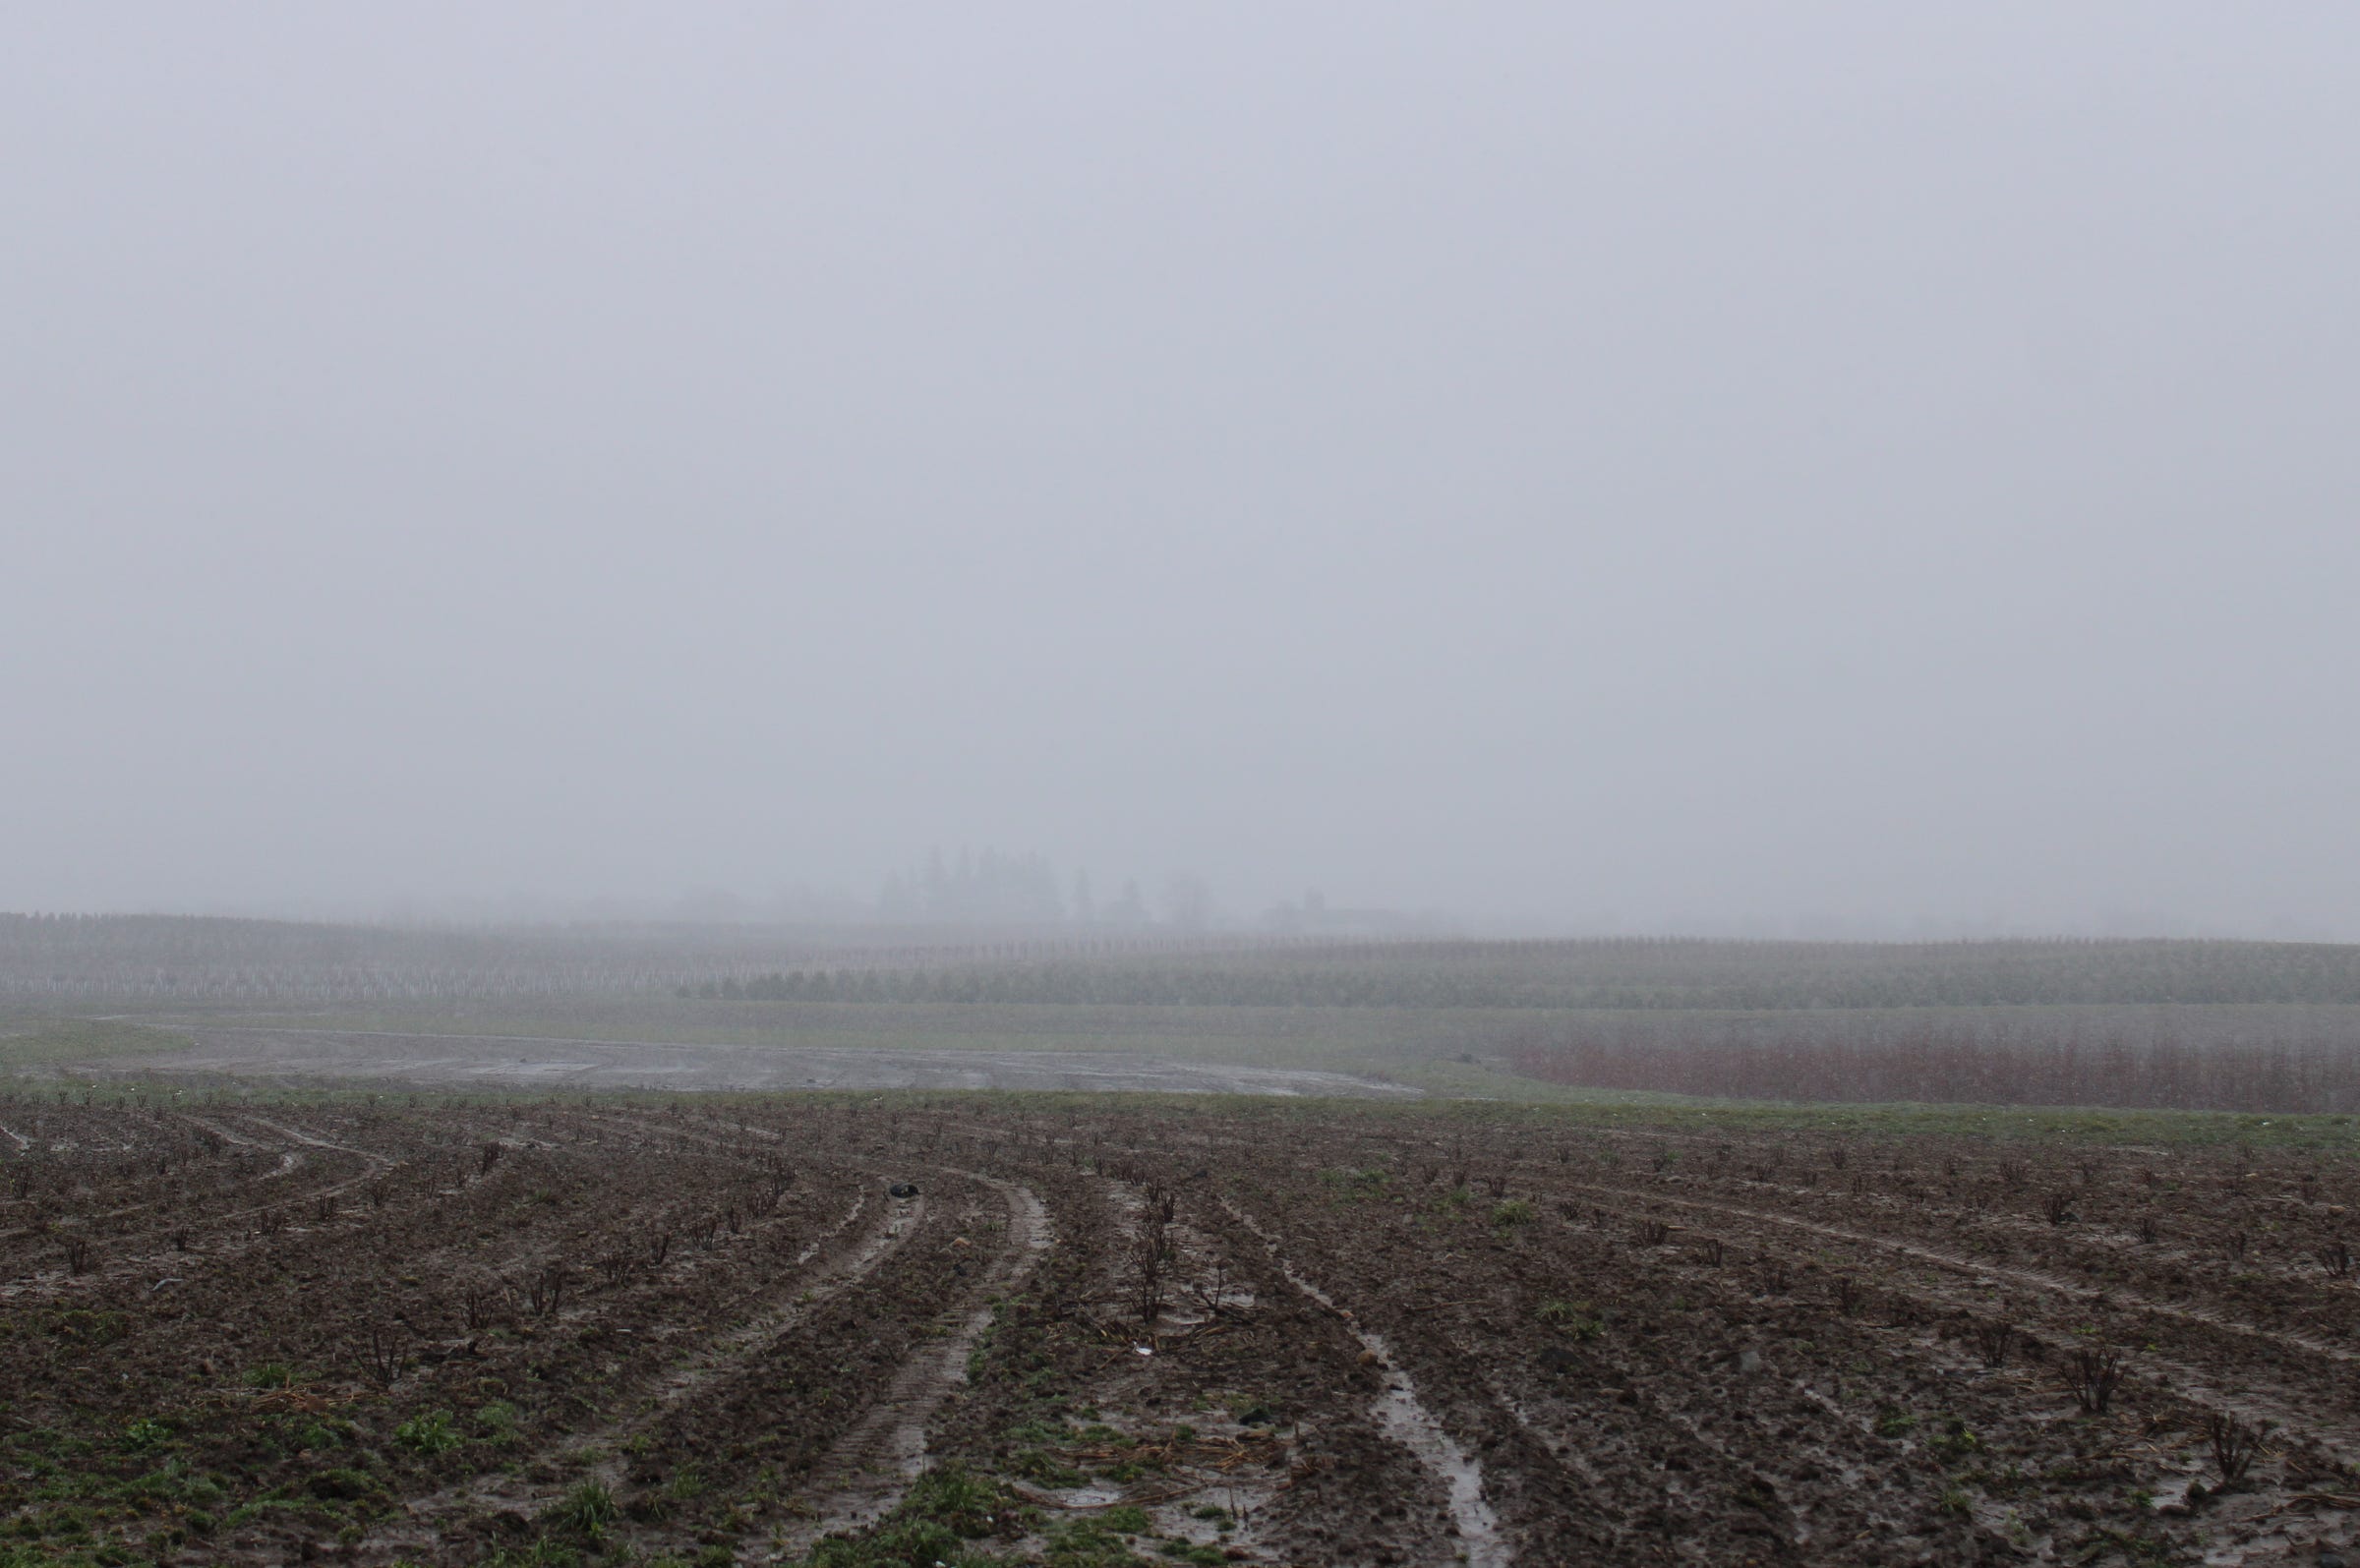 a photograph of a foggy field. in the foreground you can see the furrows in the field where water collects and is muddy from recent rain. in the midground are tall red stick plants. in the background are some hazy trees in the morning mist, barely viewable from this distance.